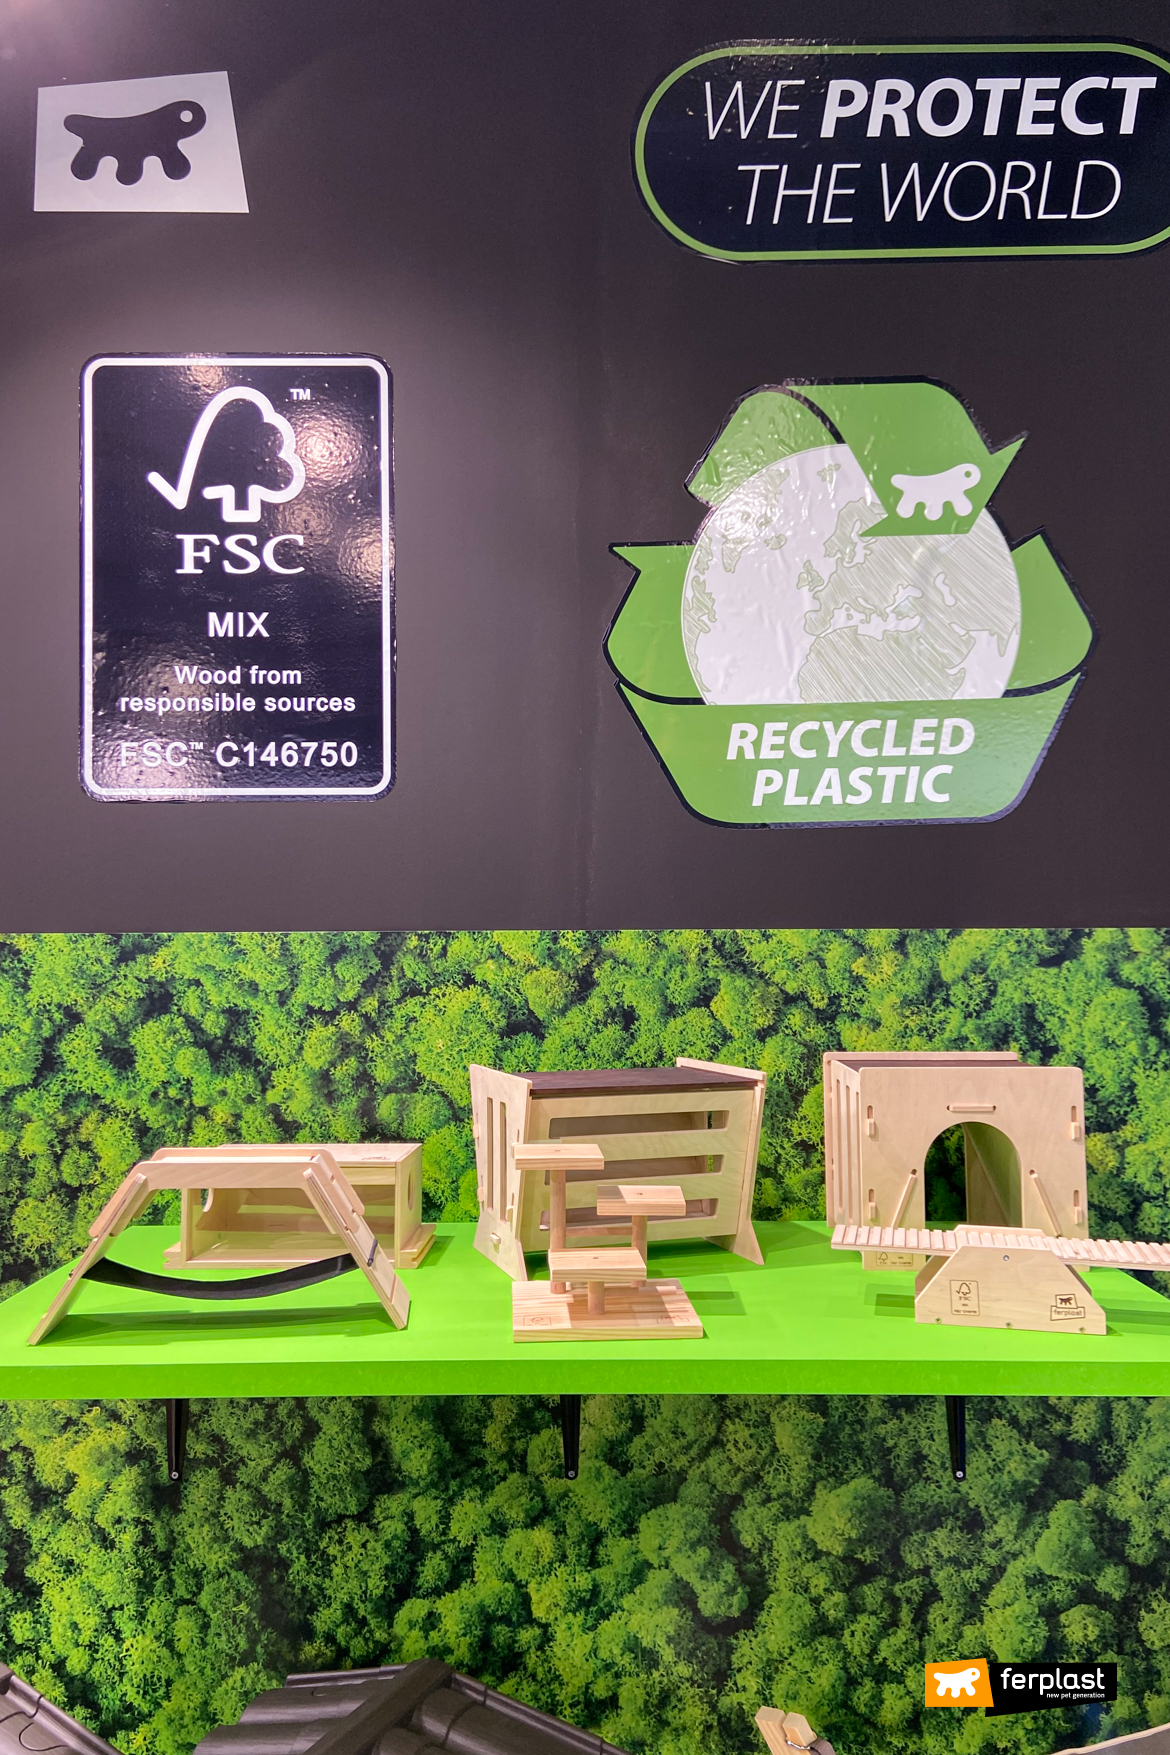 FSC wood products by Ferplast at Zoomark 2021